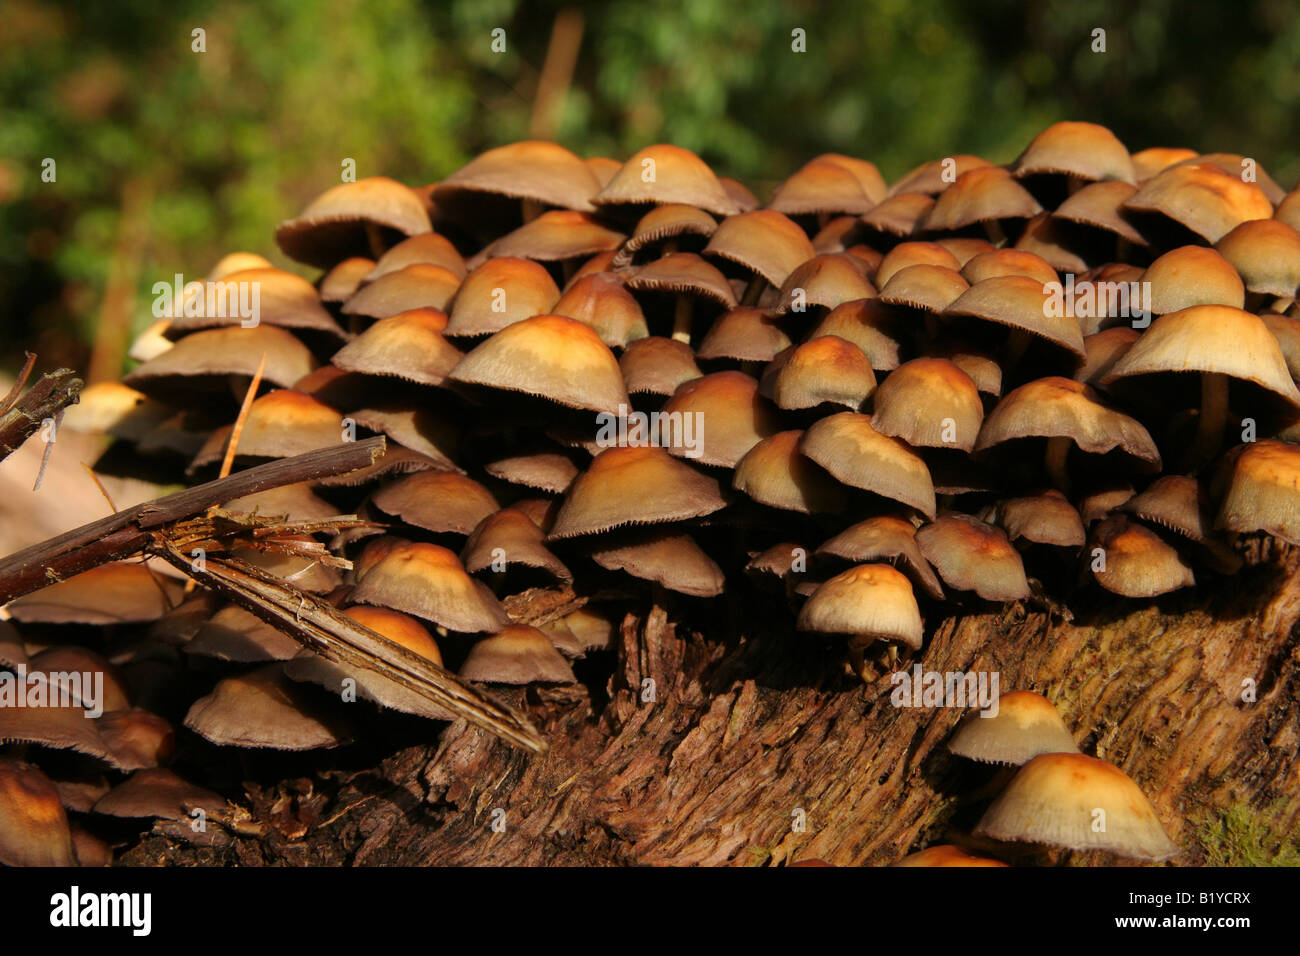 Cluster of brown white mushrooms growing on side of tree stump Stock Photo